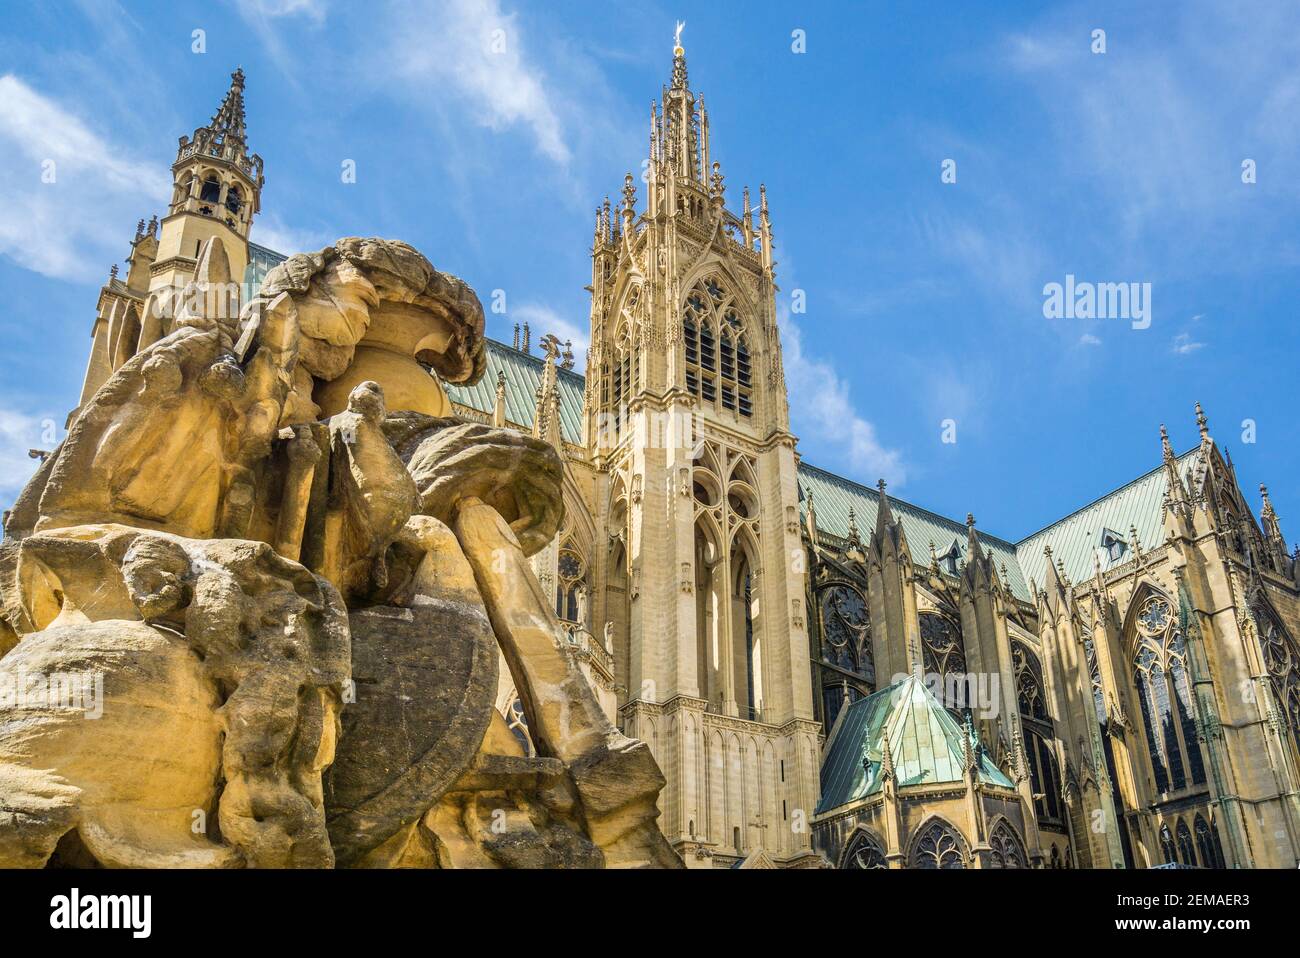 one the Place d'Armes martial symbolism sculptures with view of Metz cathedral's La Mutte tower and Horloge tower, Metz, Lorraine, Moselle department, Stock Photo